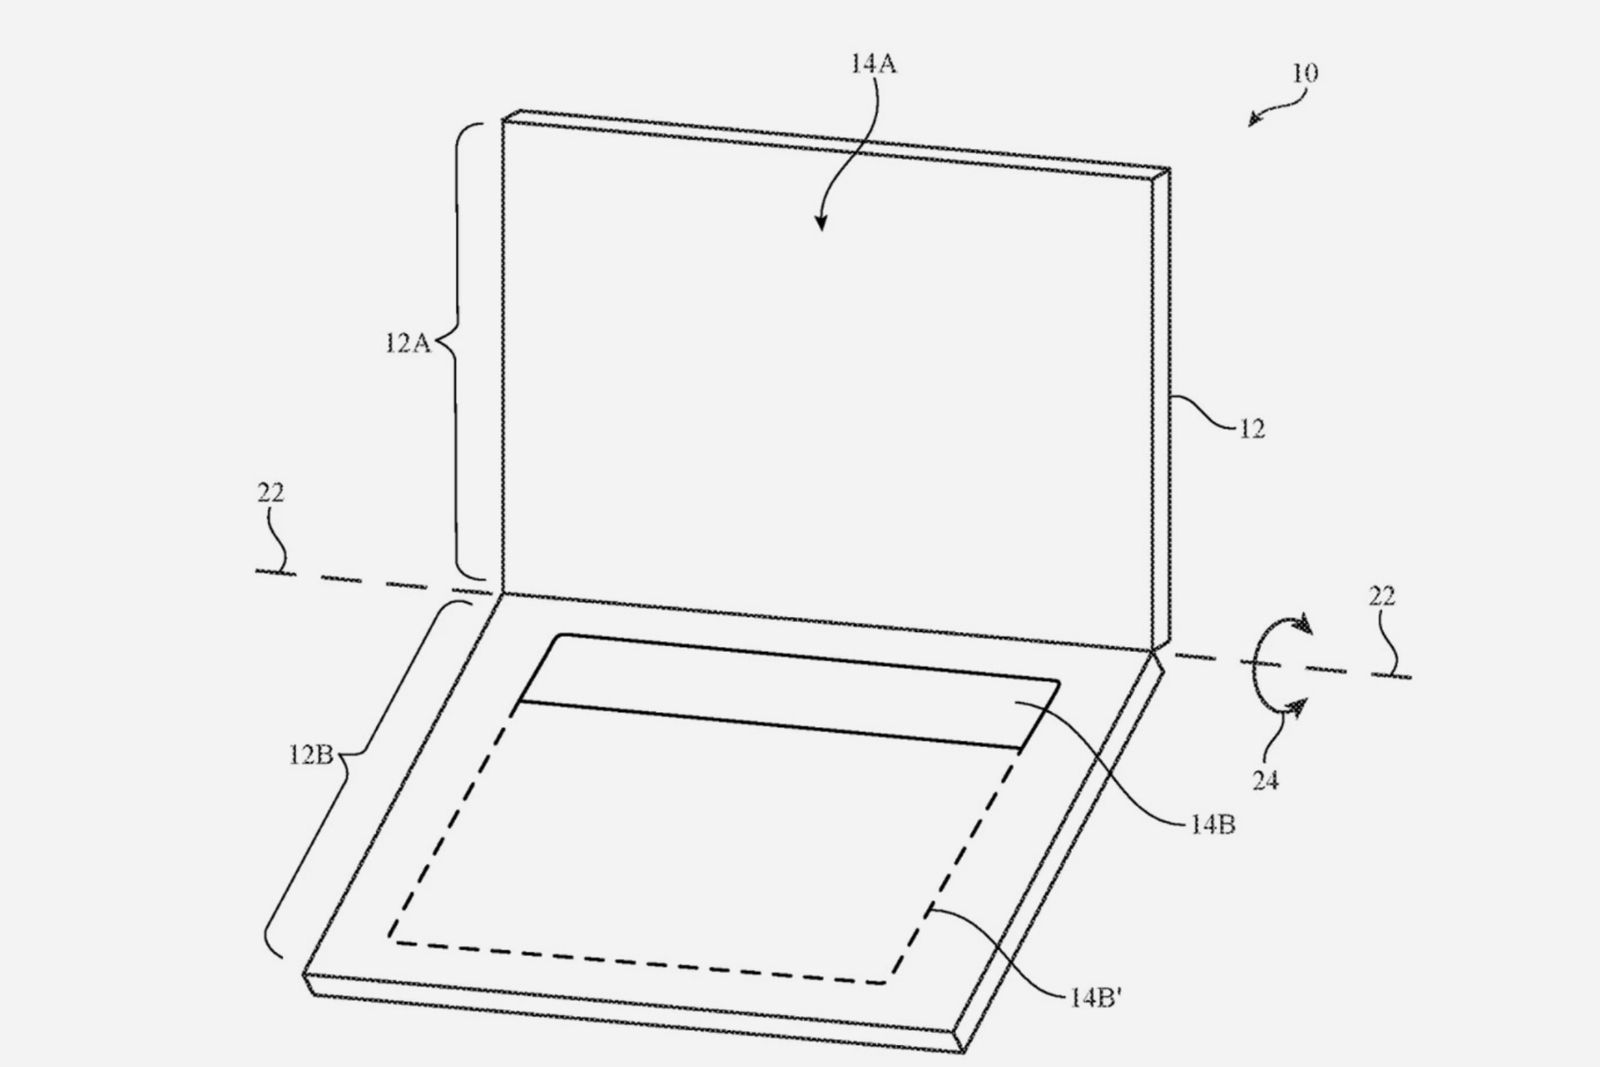 This Apple Patent Depicts A Macbook With A Touch Bar For The Keyboard image 2